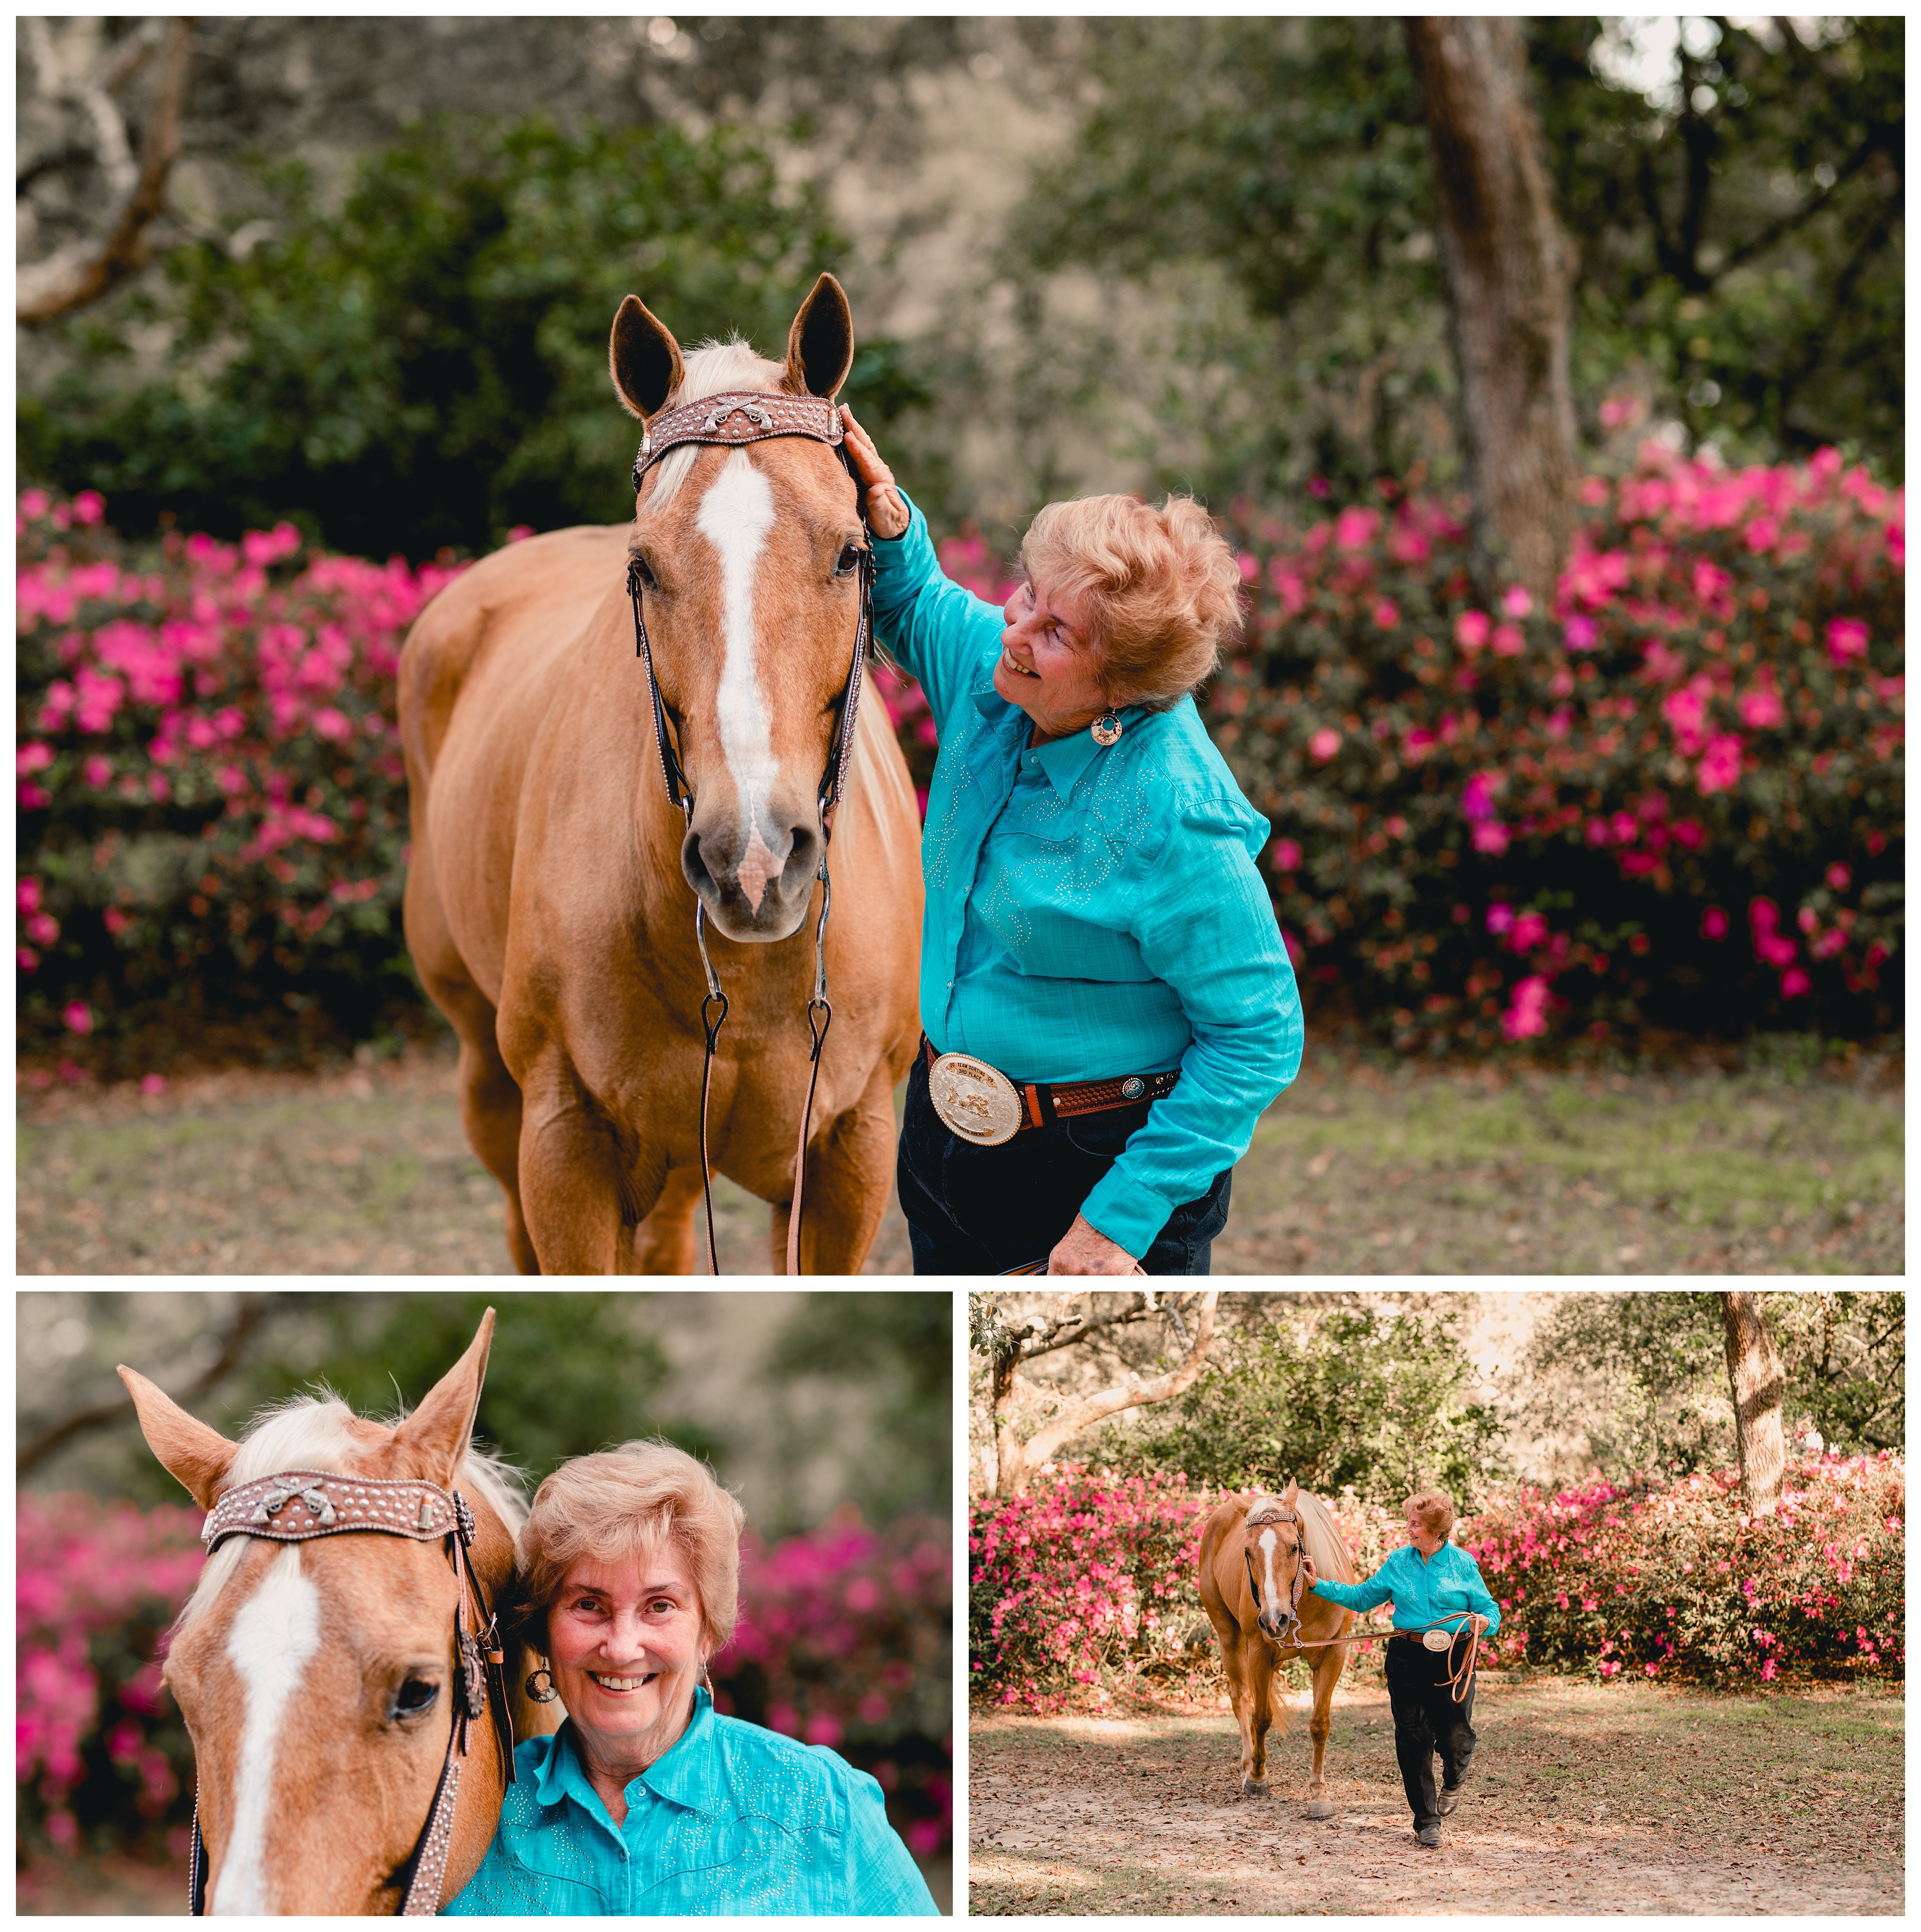 Old bond between horse and rider in Ocala, FL. Shelly Williams Photography